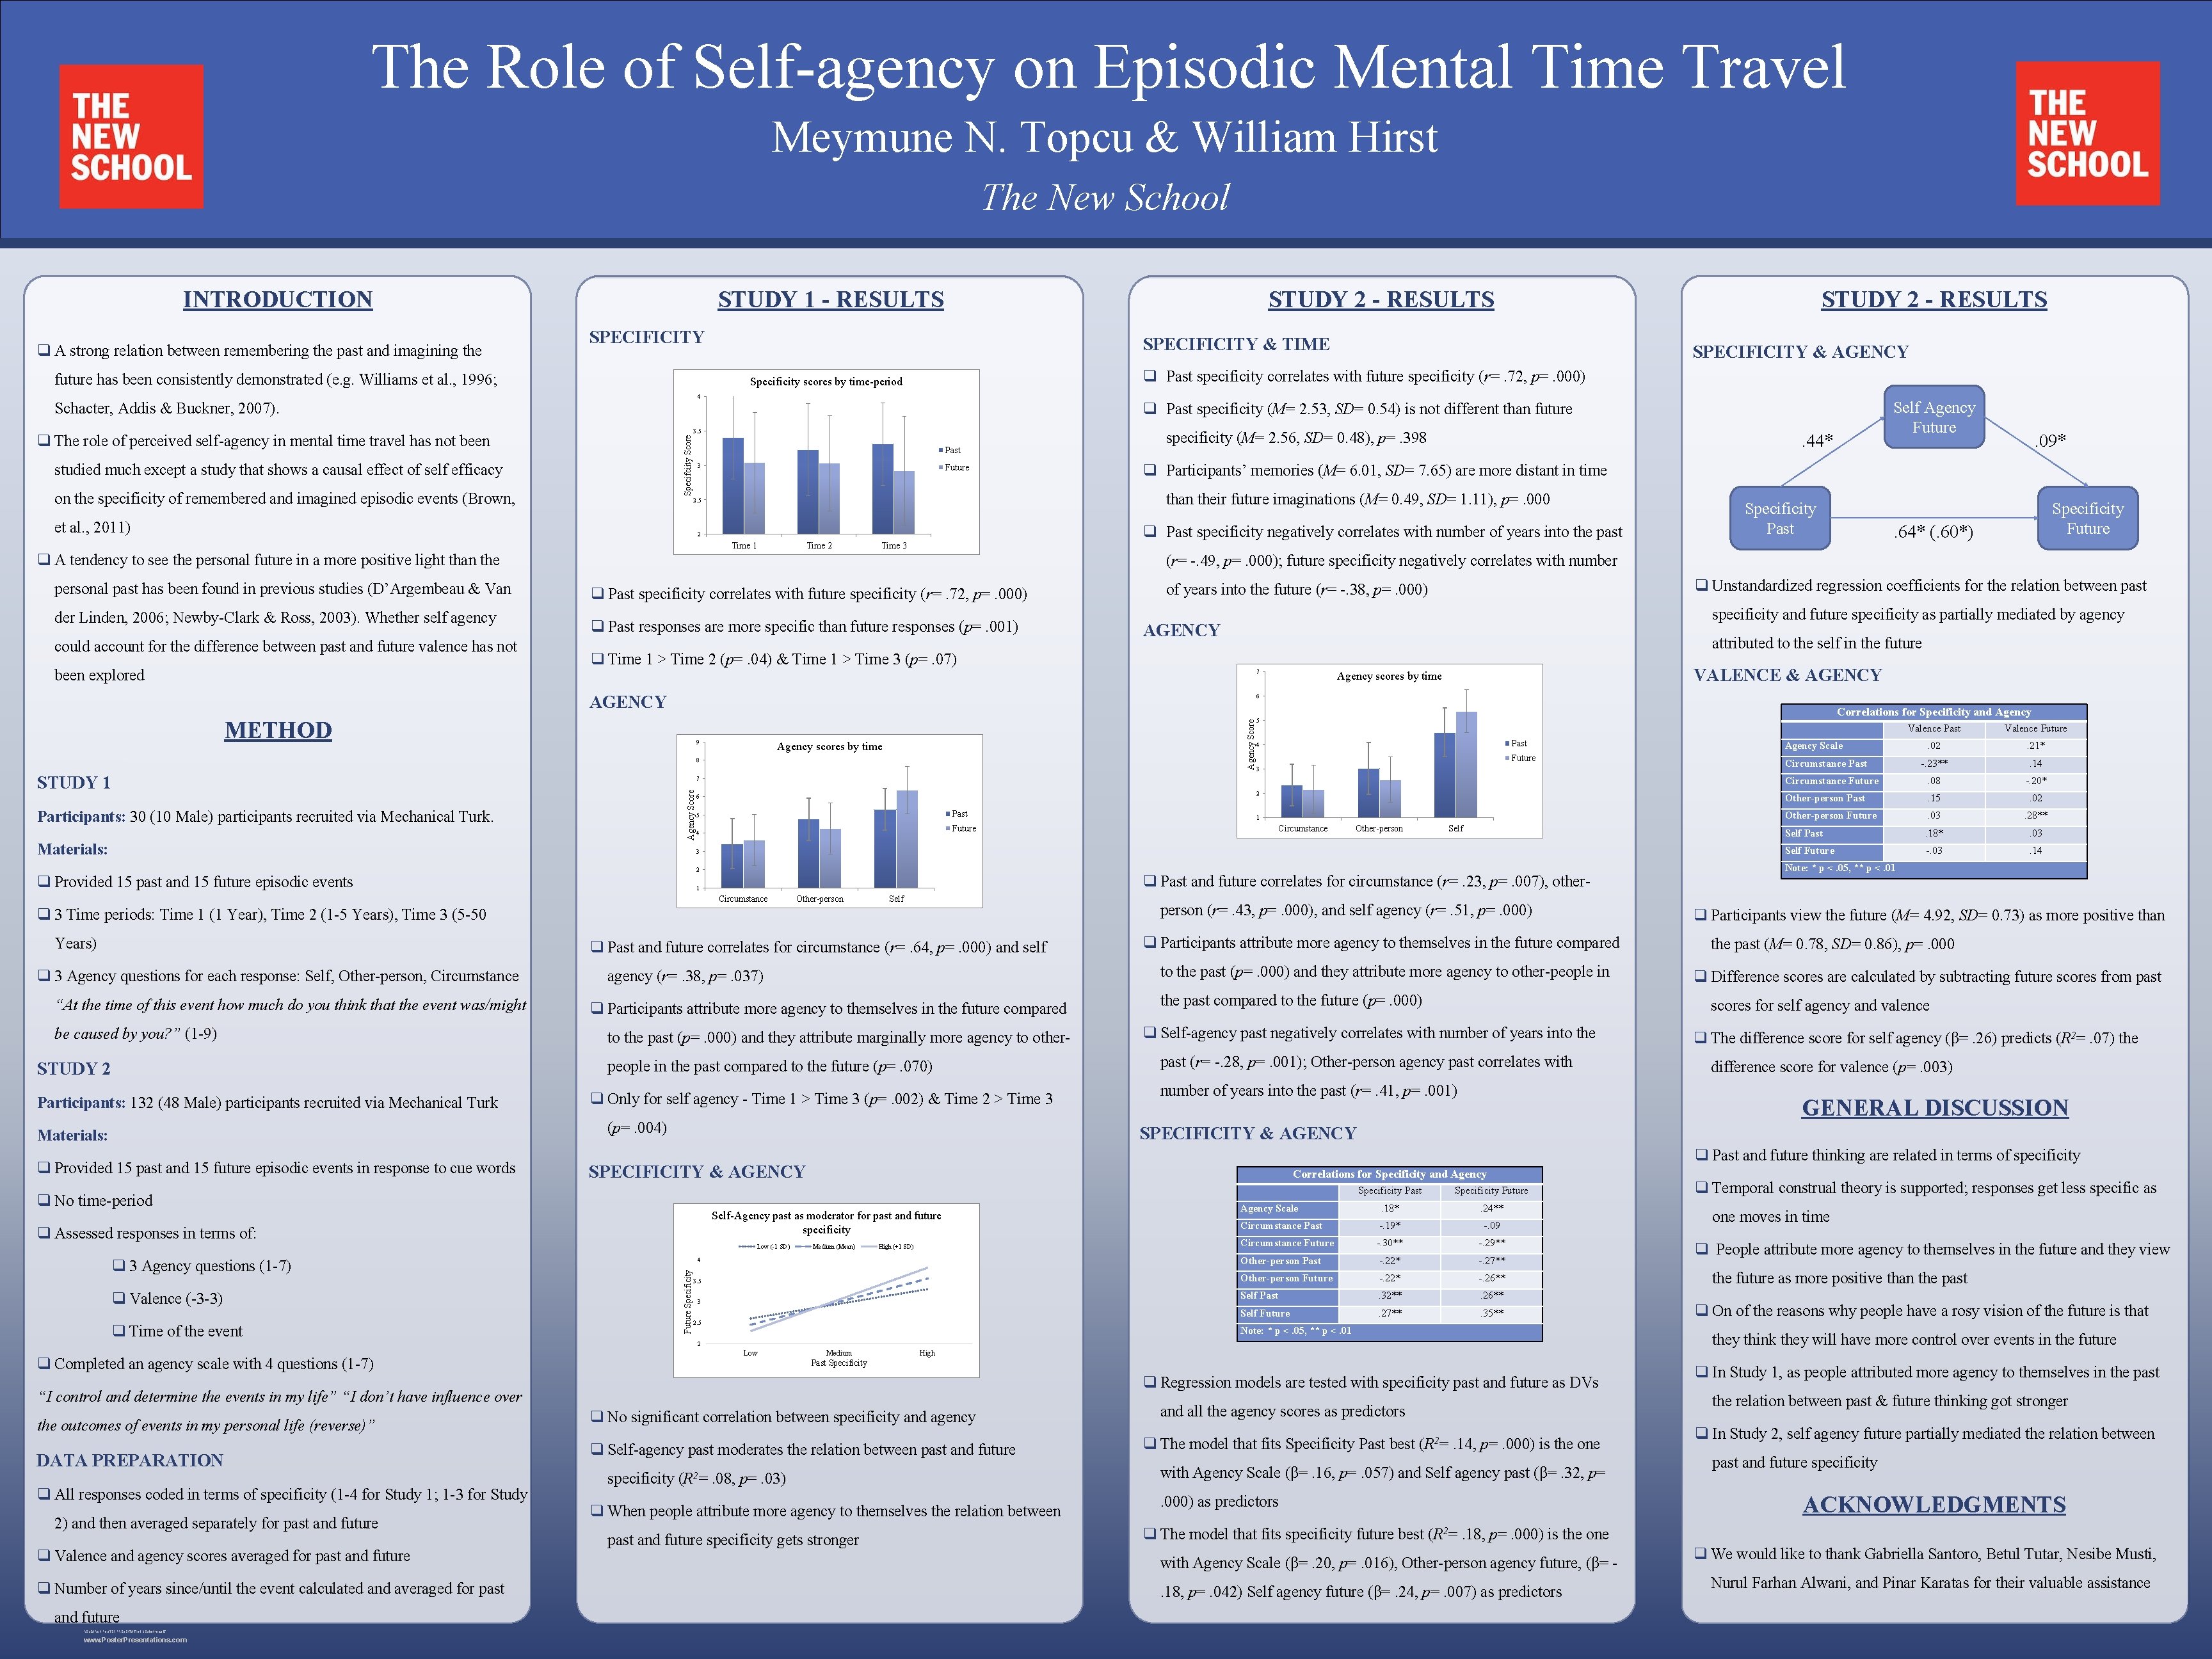 The Role of Self-agency on Episodic Mental Time Travel Meymune N. Topcu & William